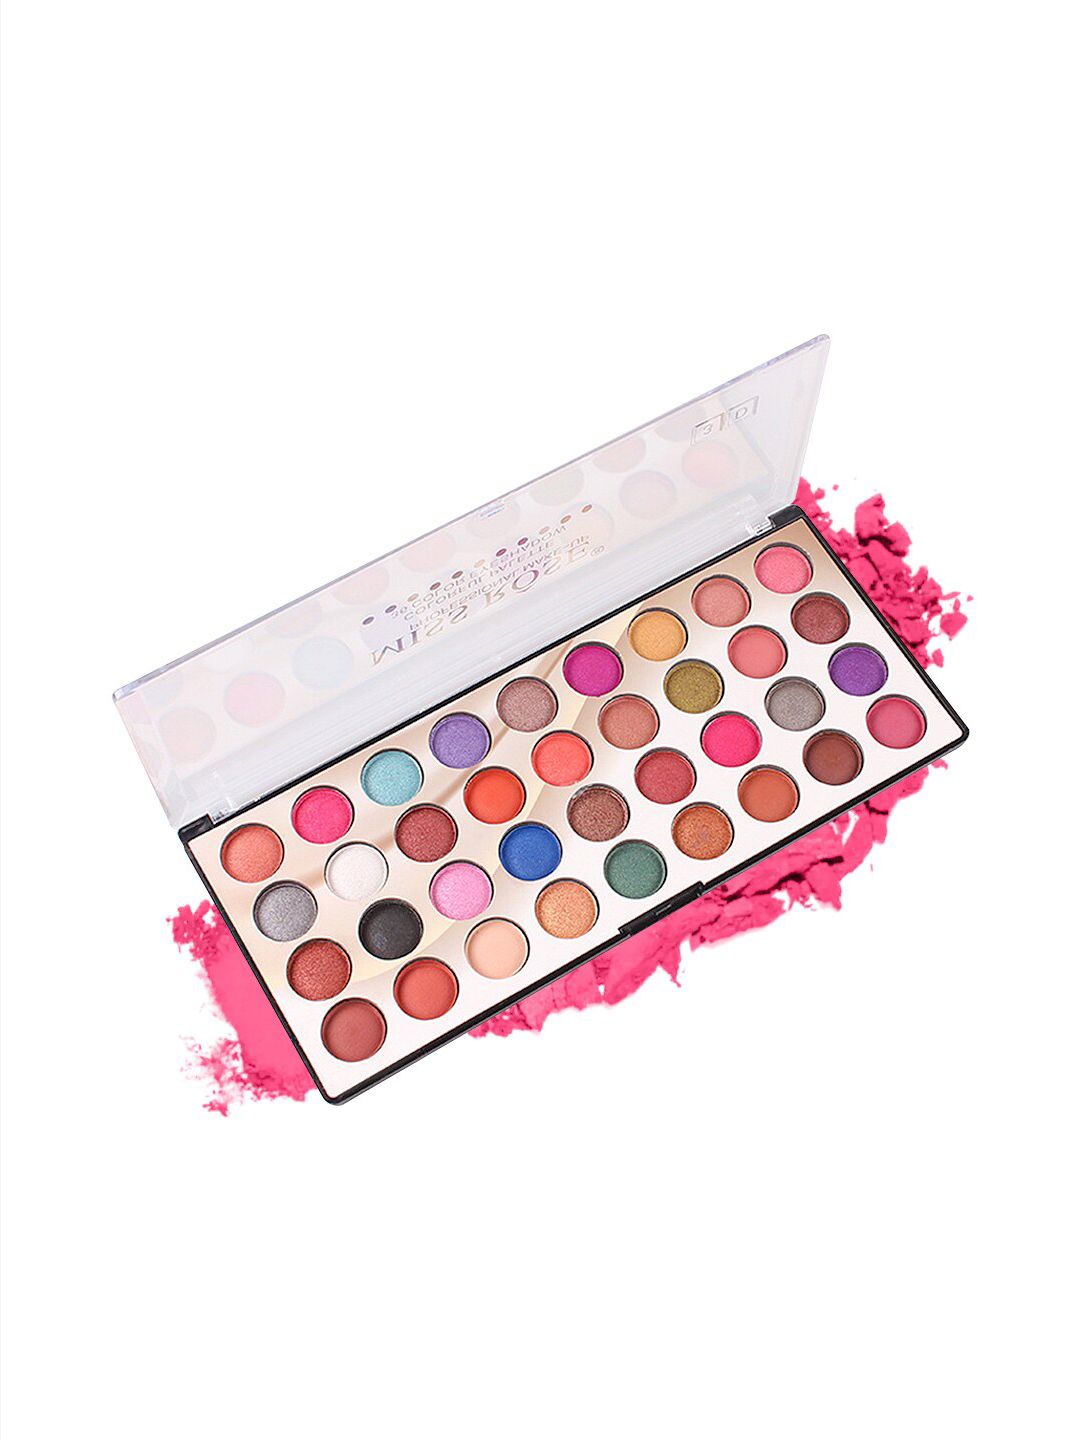 MISS ROSE Professional 36 Color Eyeshadow Palette 7001-060 M1 Price in India